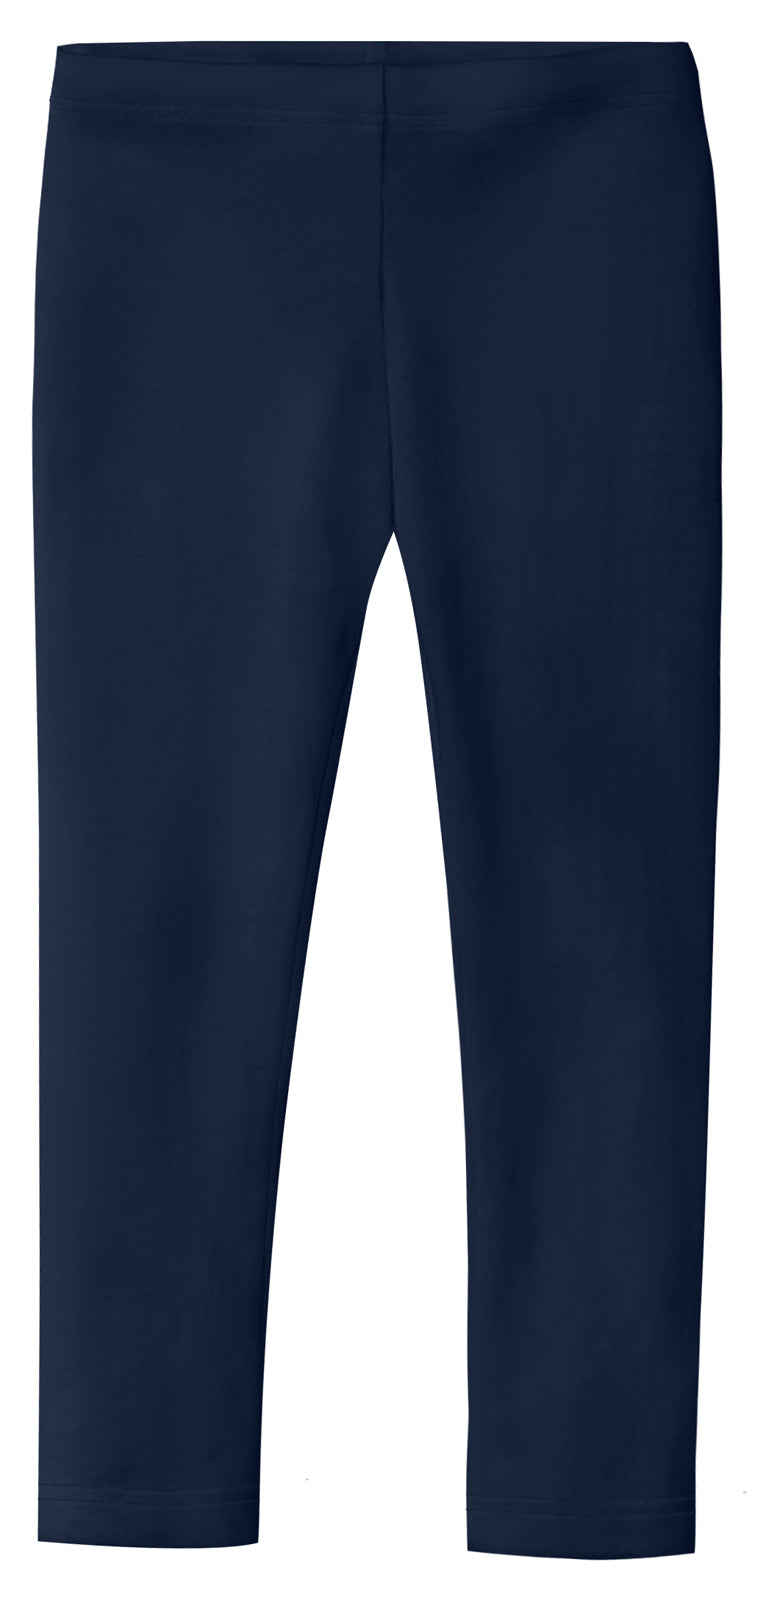 Girls Soft 100% Cotton Solid Colored Leggings | Navy